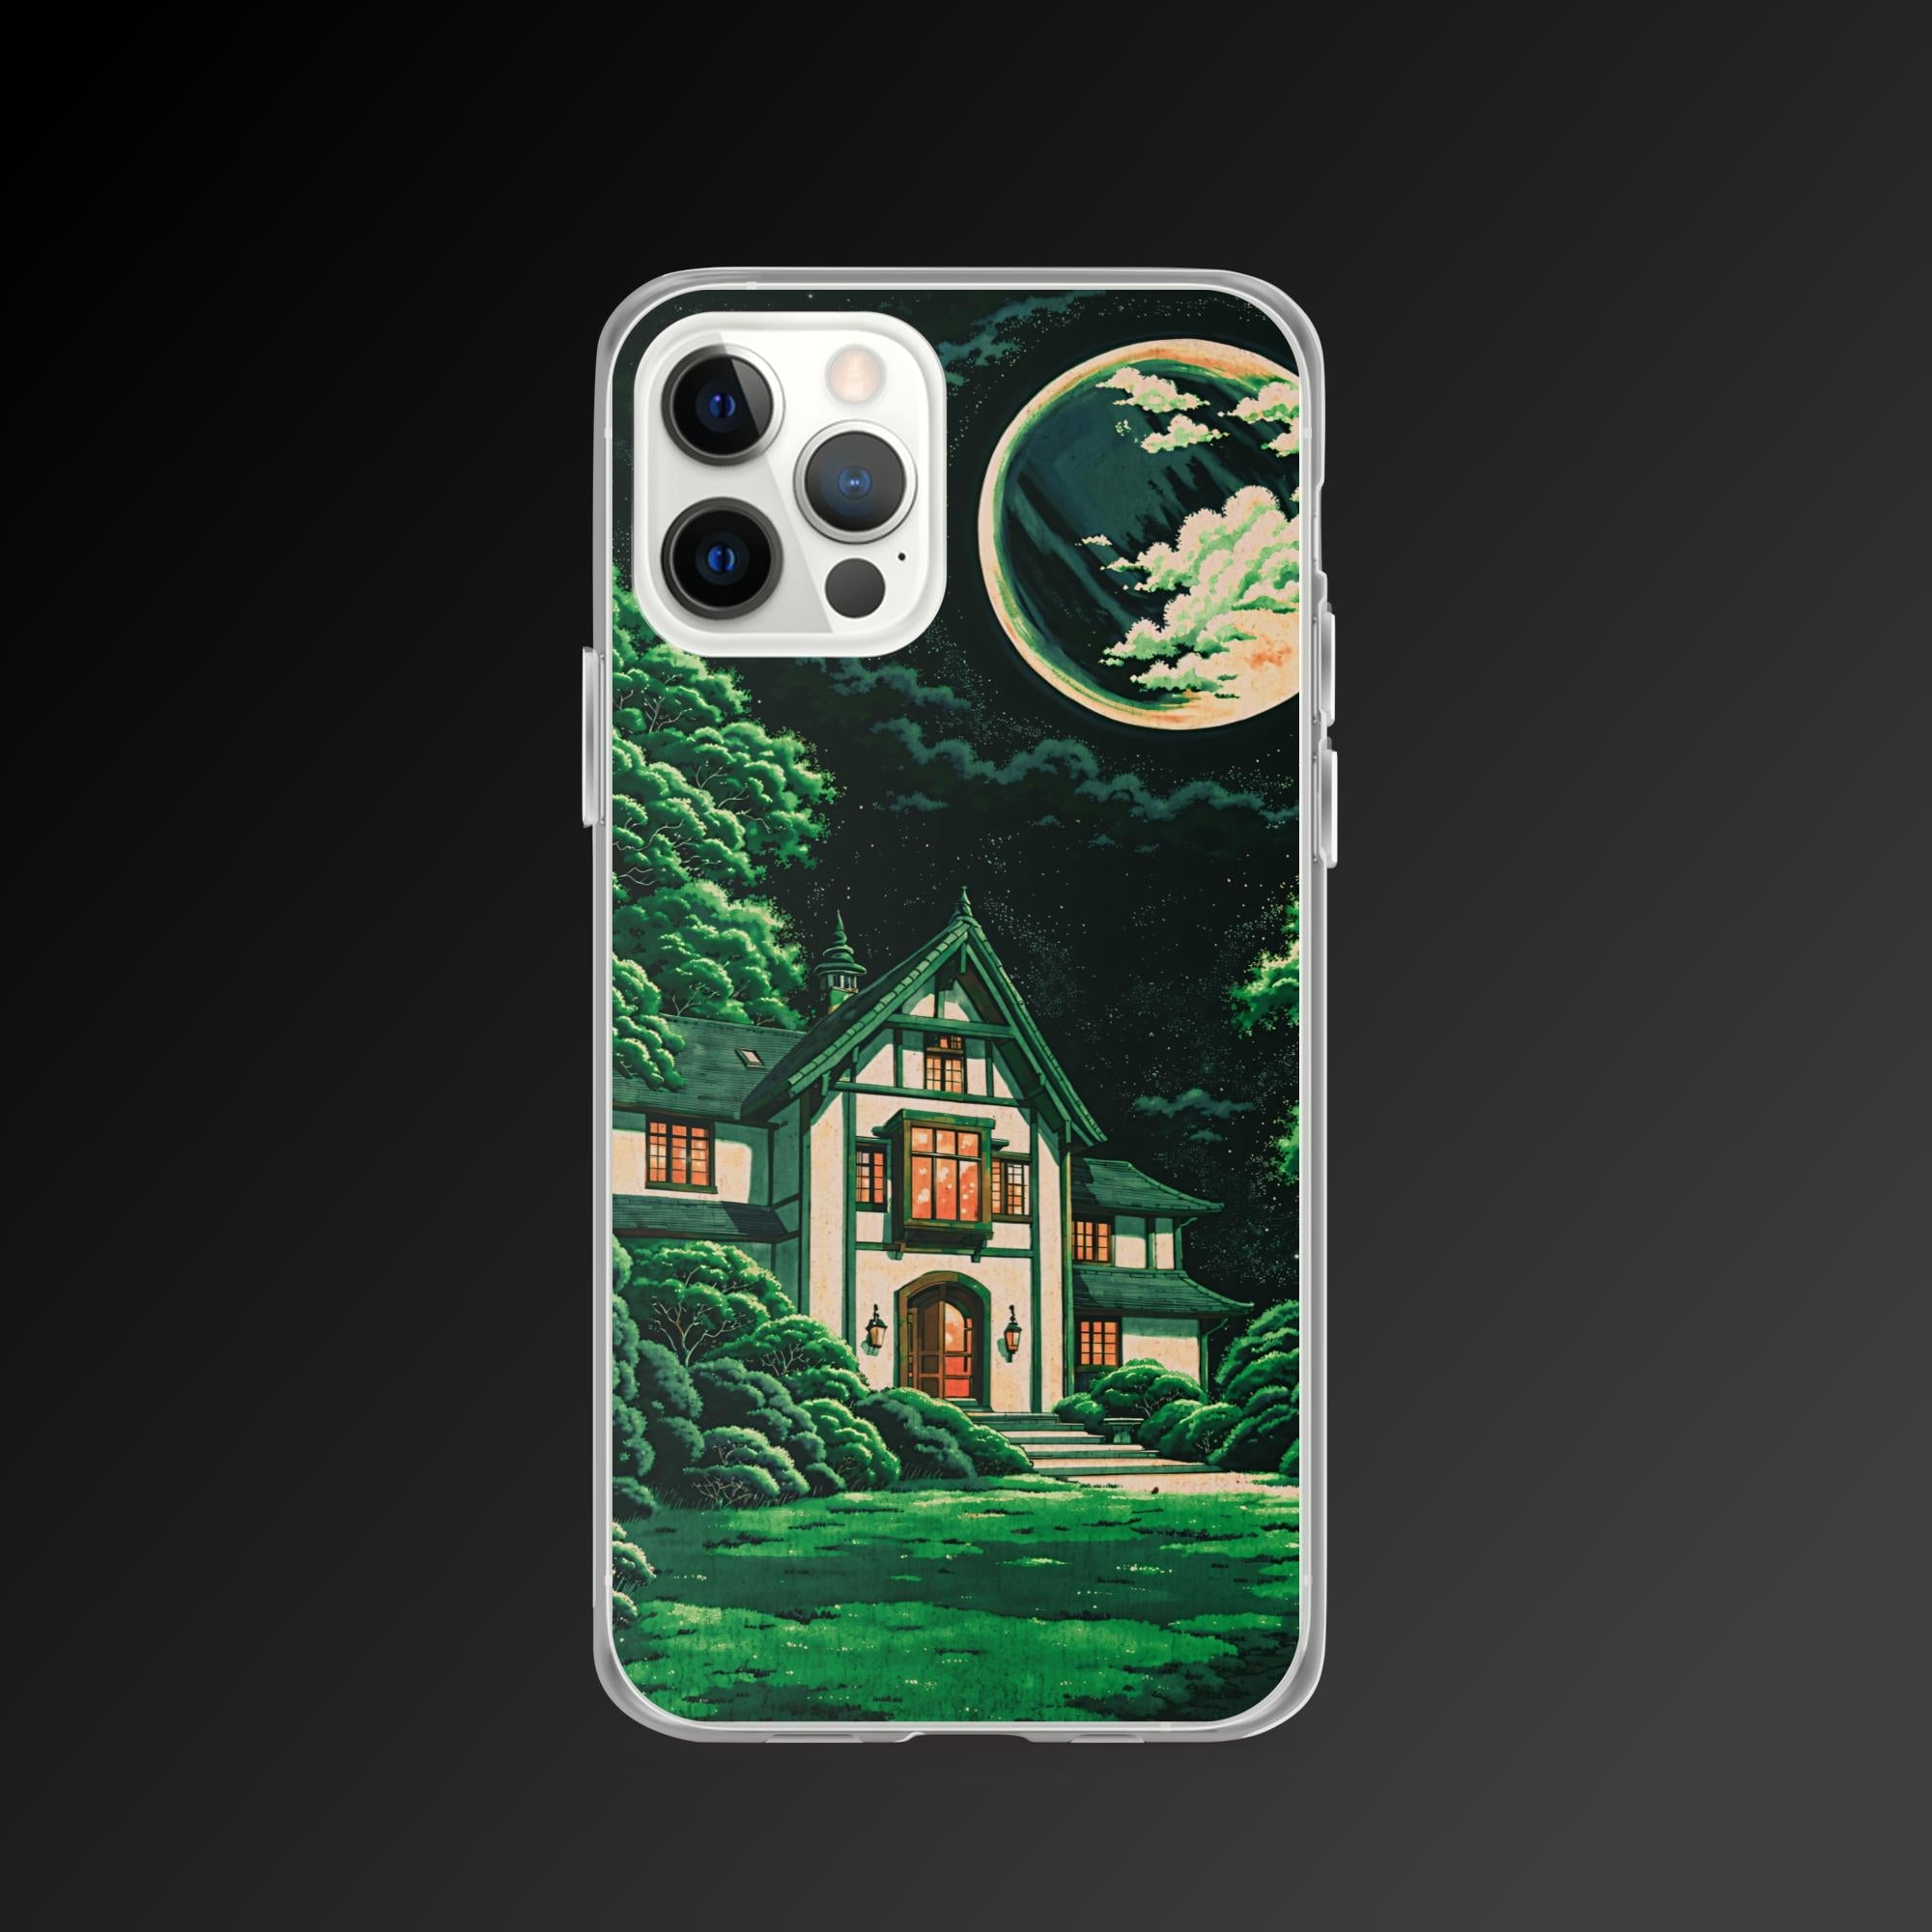 "Crescent night" clear iphone case - Clear iphone case - Ever colorful